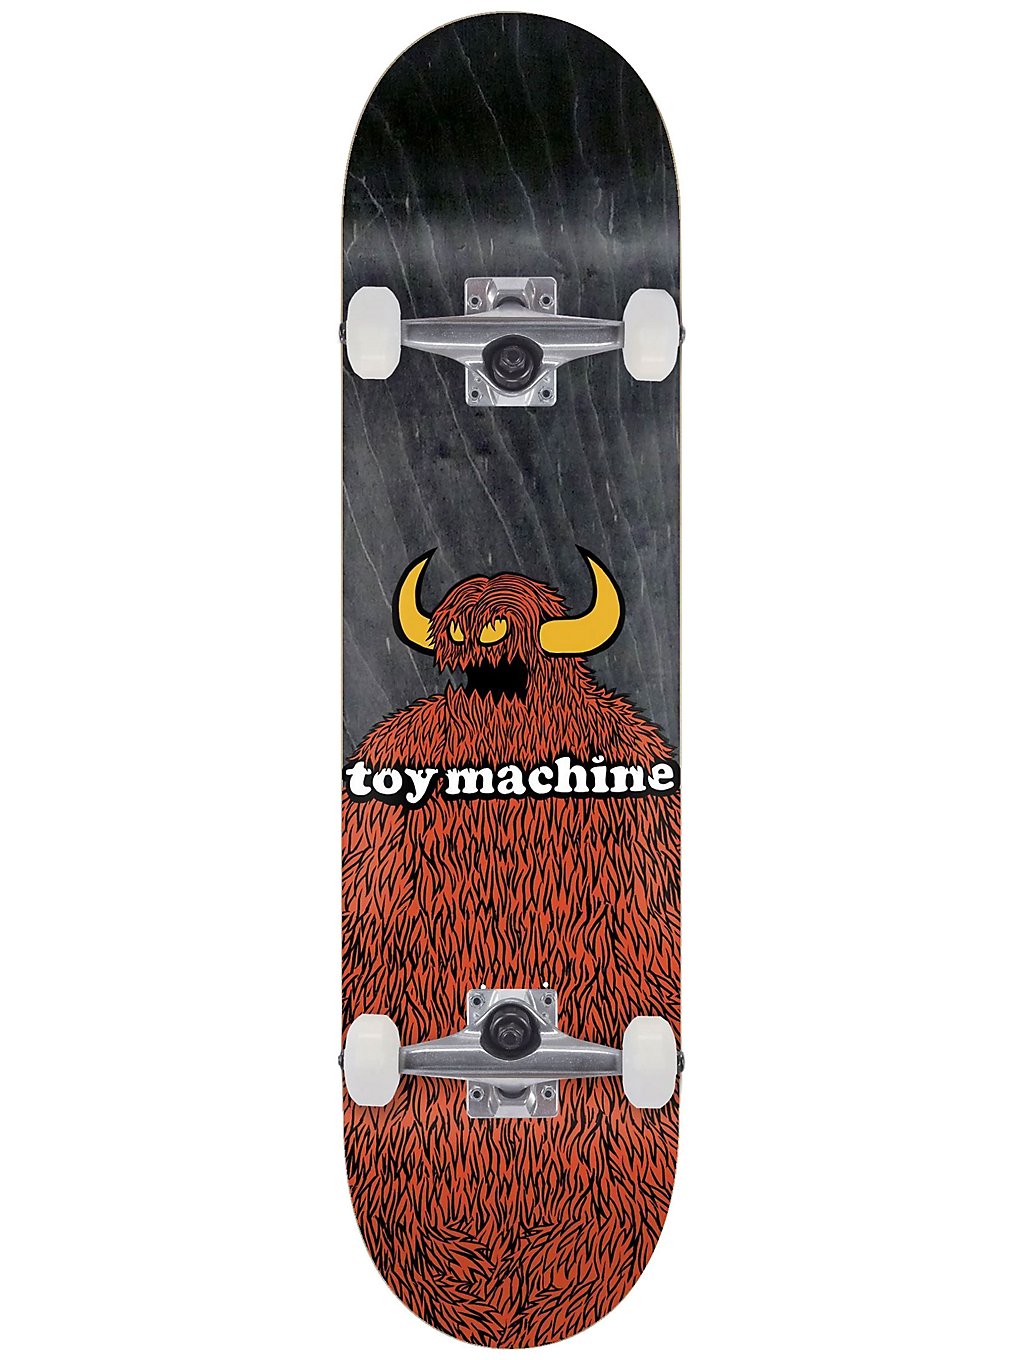 Toy Machine Furry Monster 8.0 Complete natural